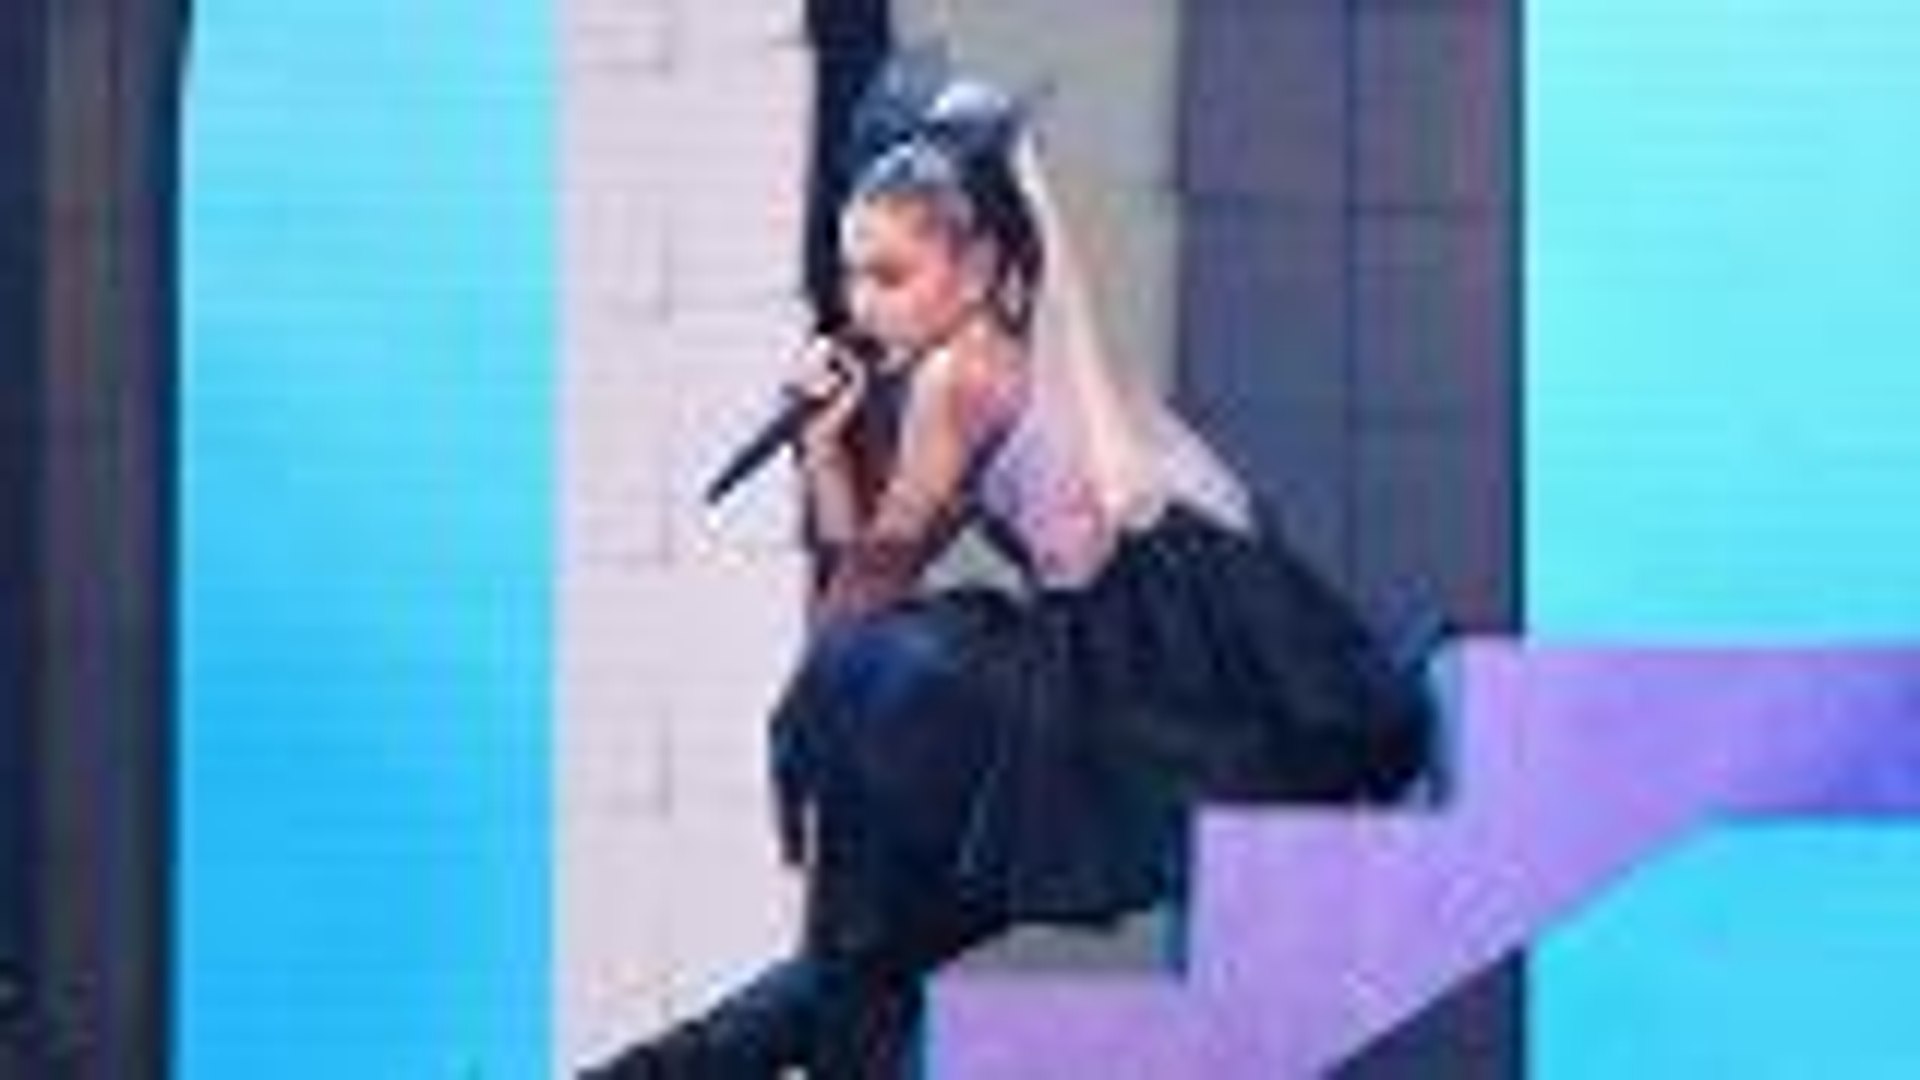 Ariana Grande Opens the Billboard Music Awards With Performance of 'No Tears Left to Cry' 